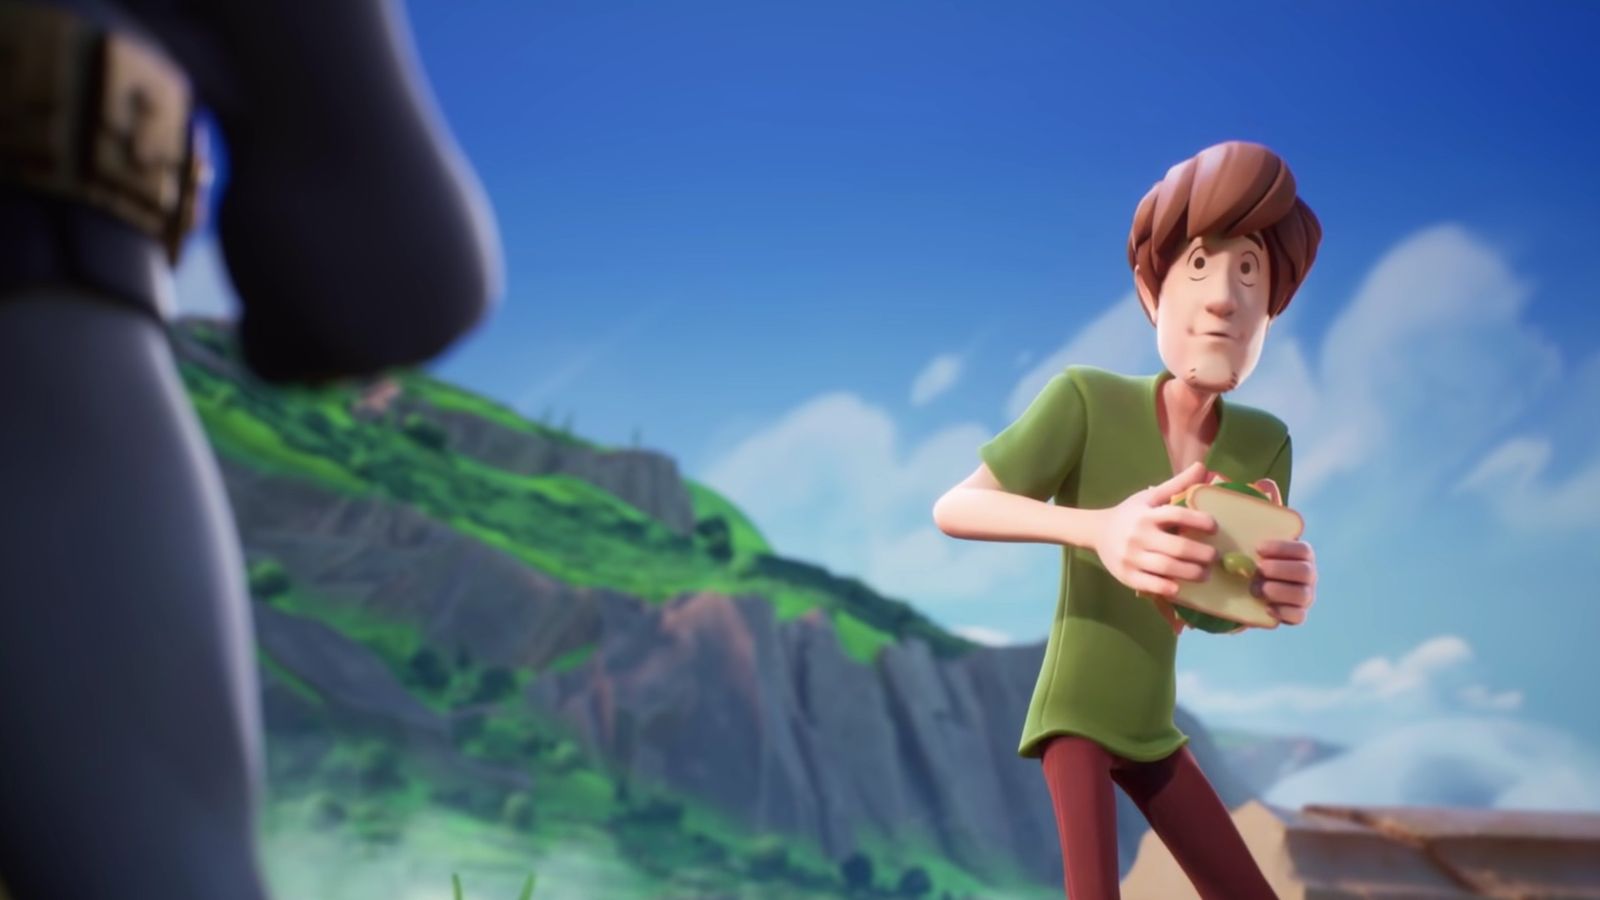 Image of Shaggy holding a sandwich in MultiVersus.